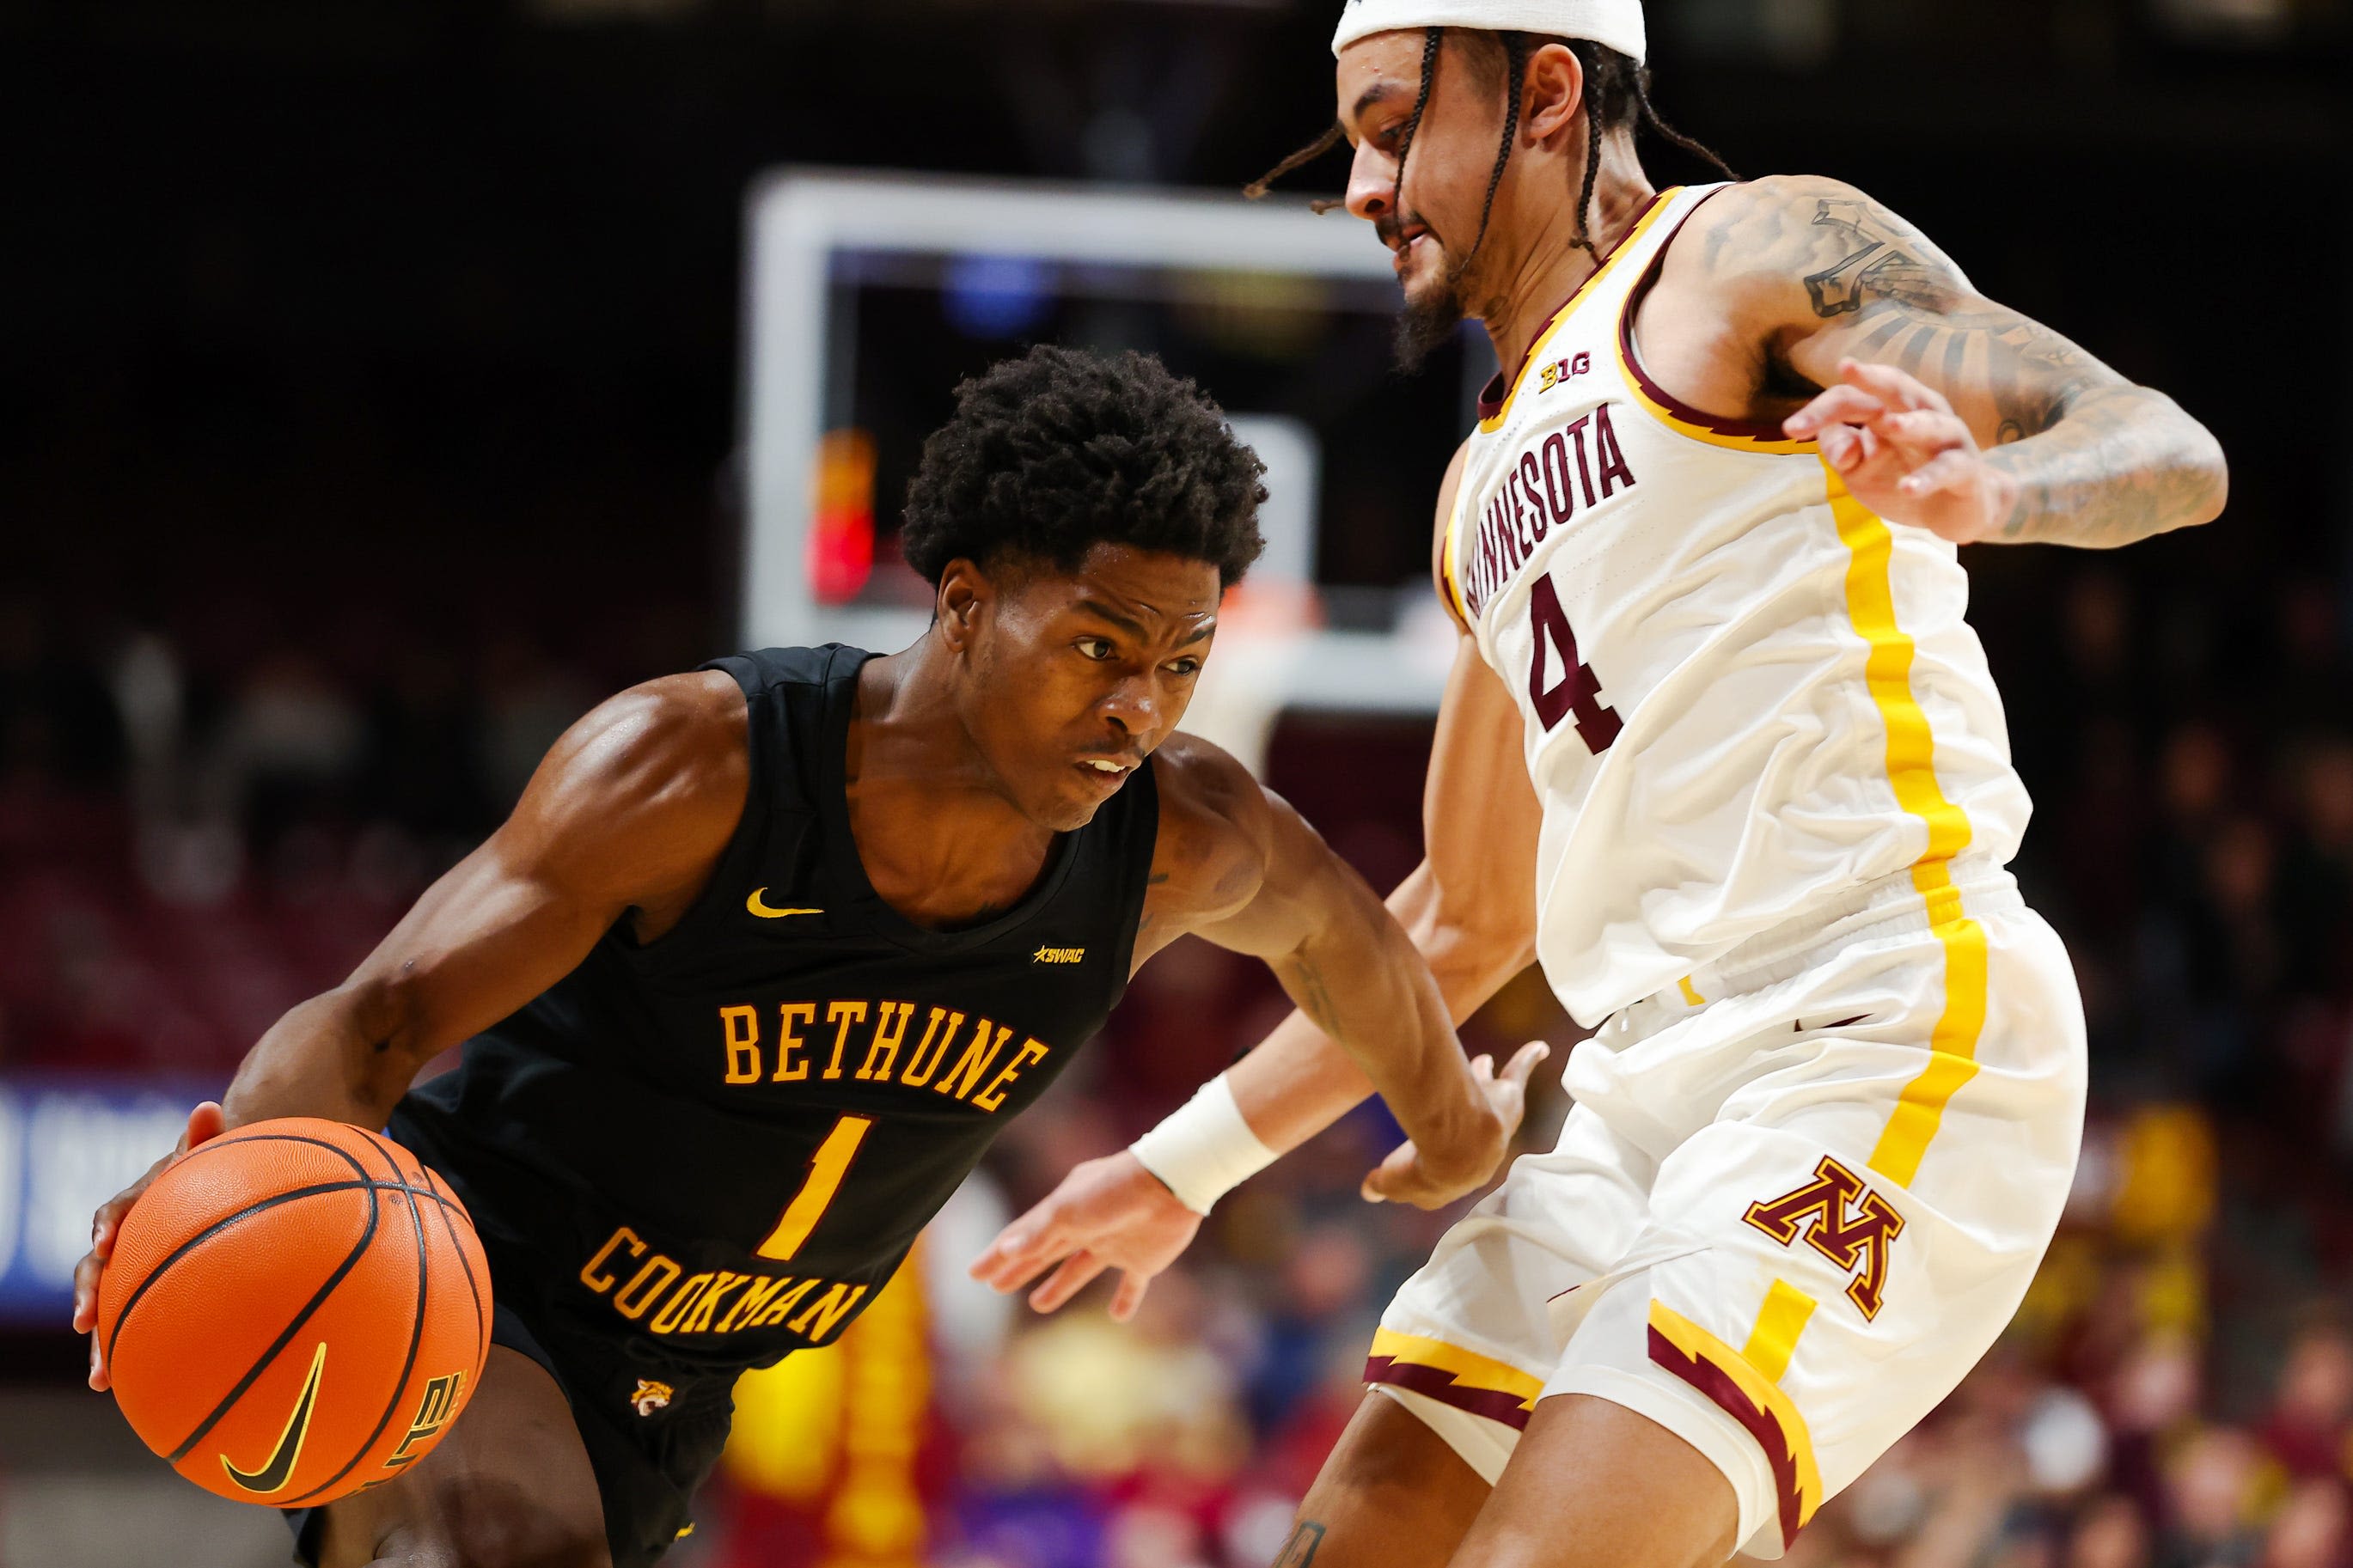 Seton Hall basketball adds Zion Harmon, transfer guard from Bethune-Cookman